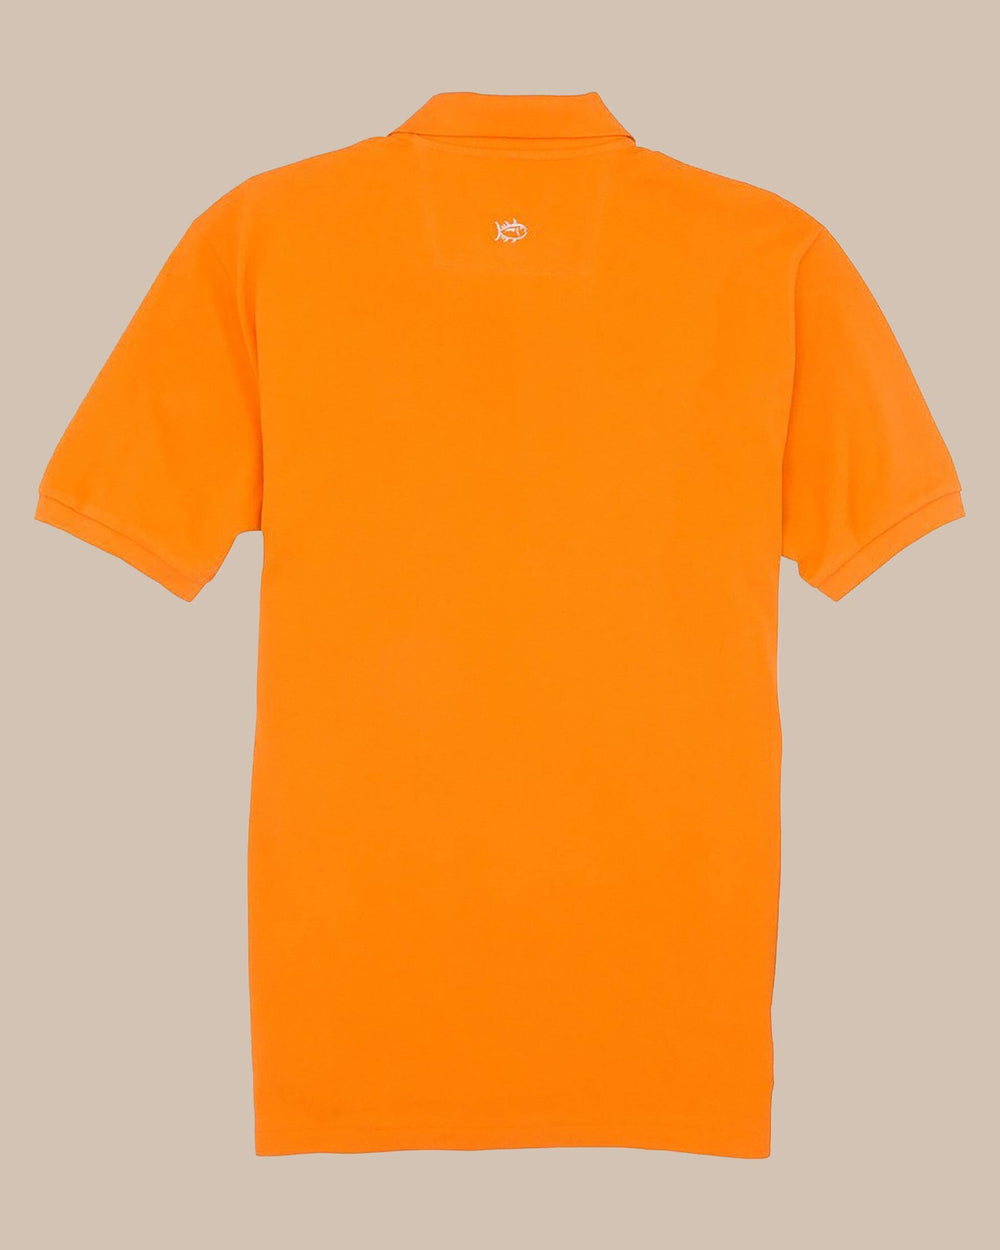 The back view of the Men's Orange Skipjack Gameday Colors Polo Shirt by Southern Tide - Rocky Top Orange